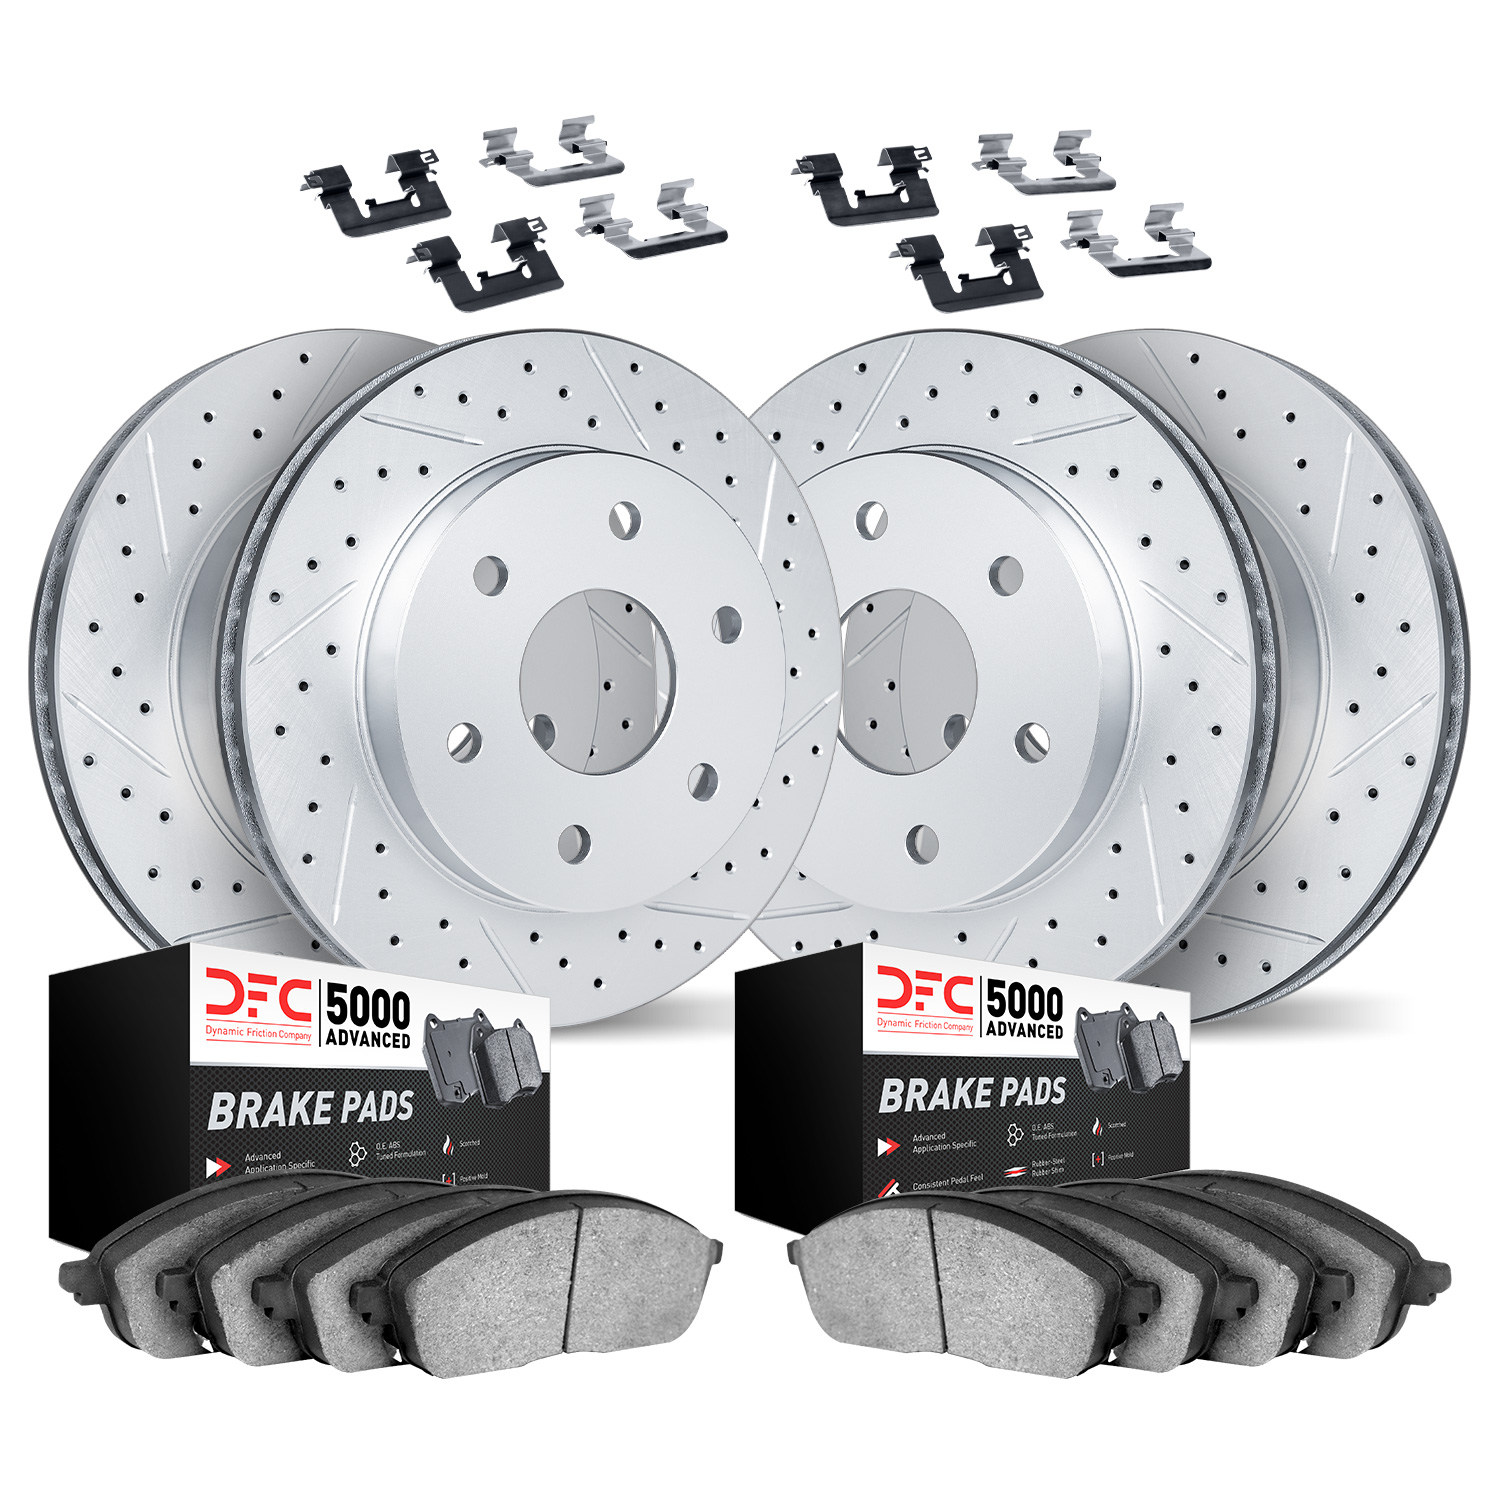 2514-40089 Geoperformance Drilled/Slotted Rotors w/5000 Advanced Brake Pads Kit & Hardware, Fits Select Multiple Makes/Models, P